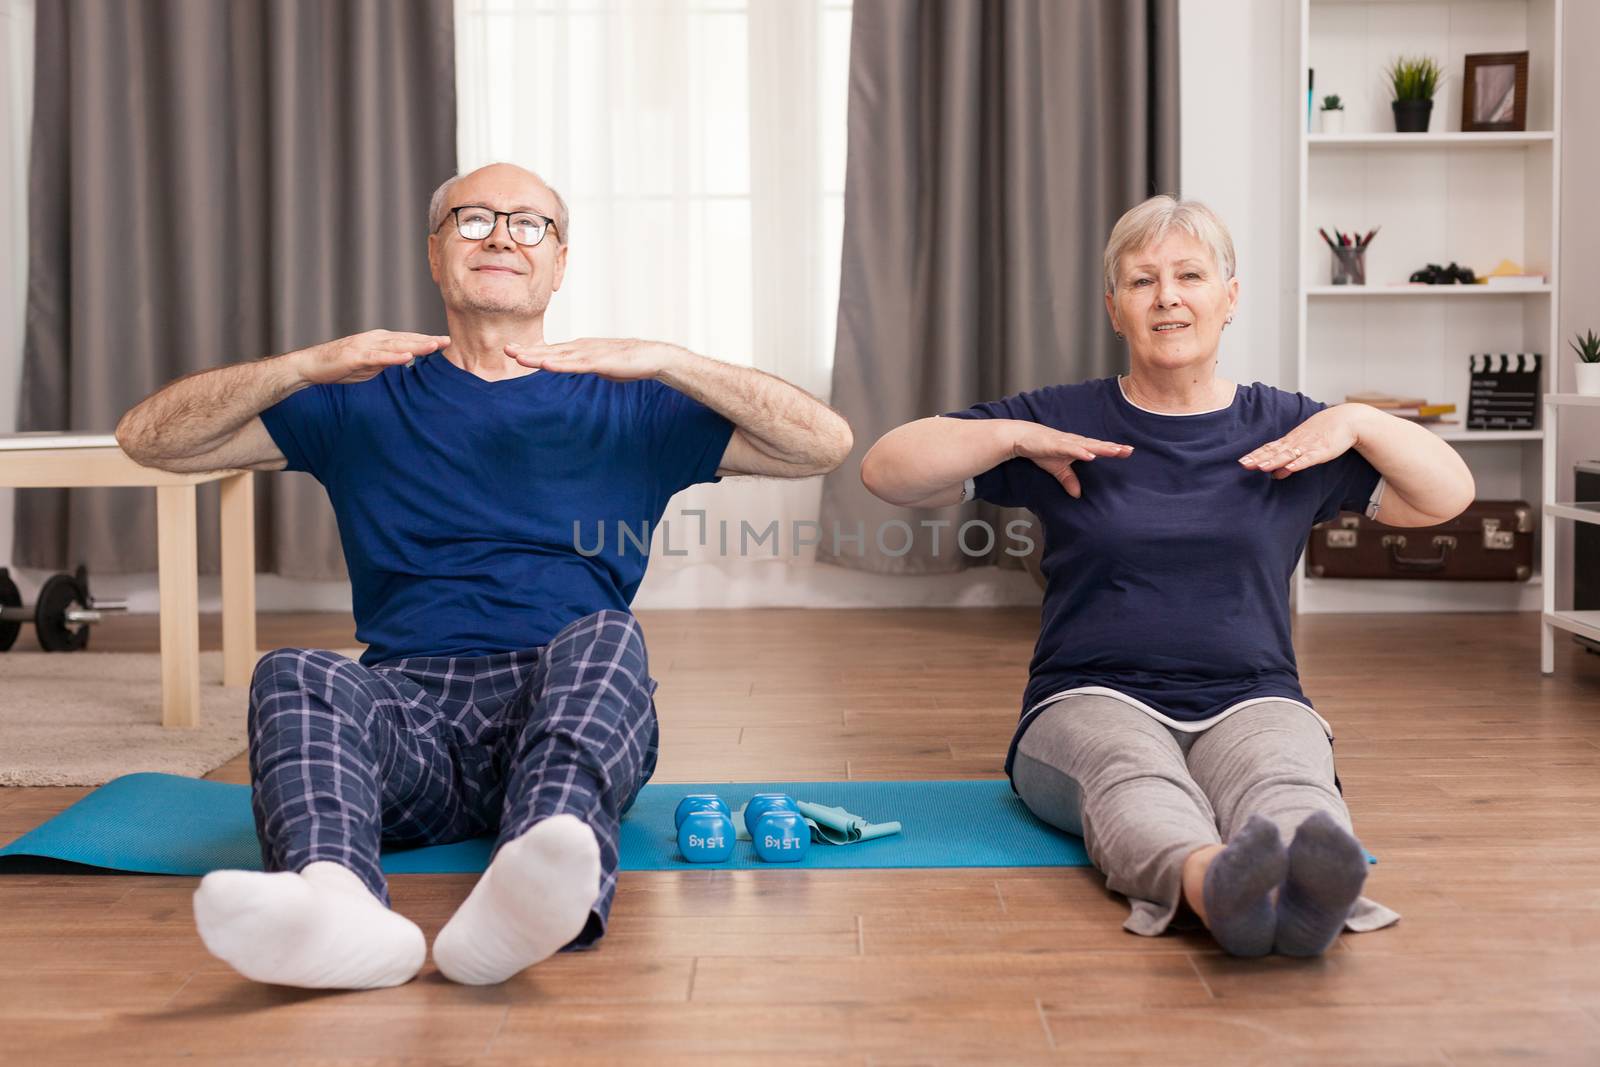 Older people who have a healthy lifestyle by DCStudio